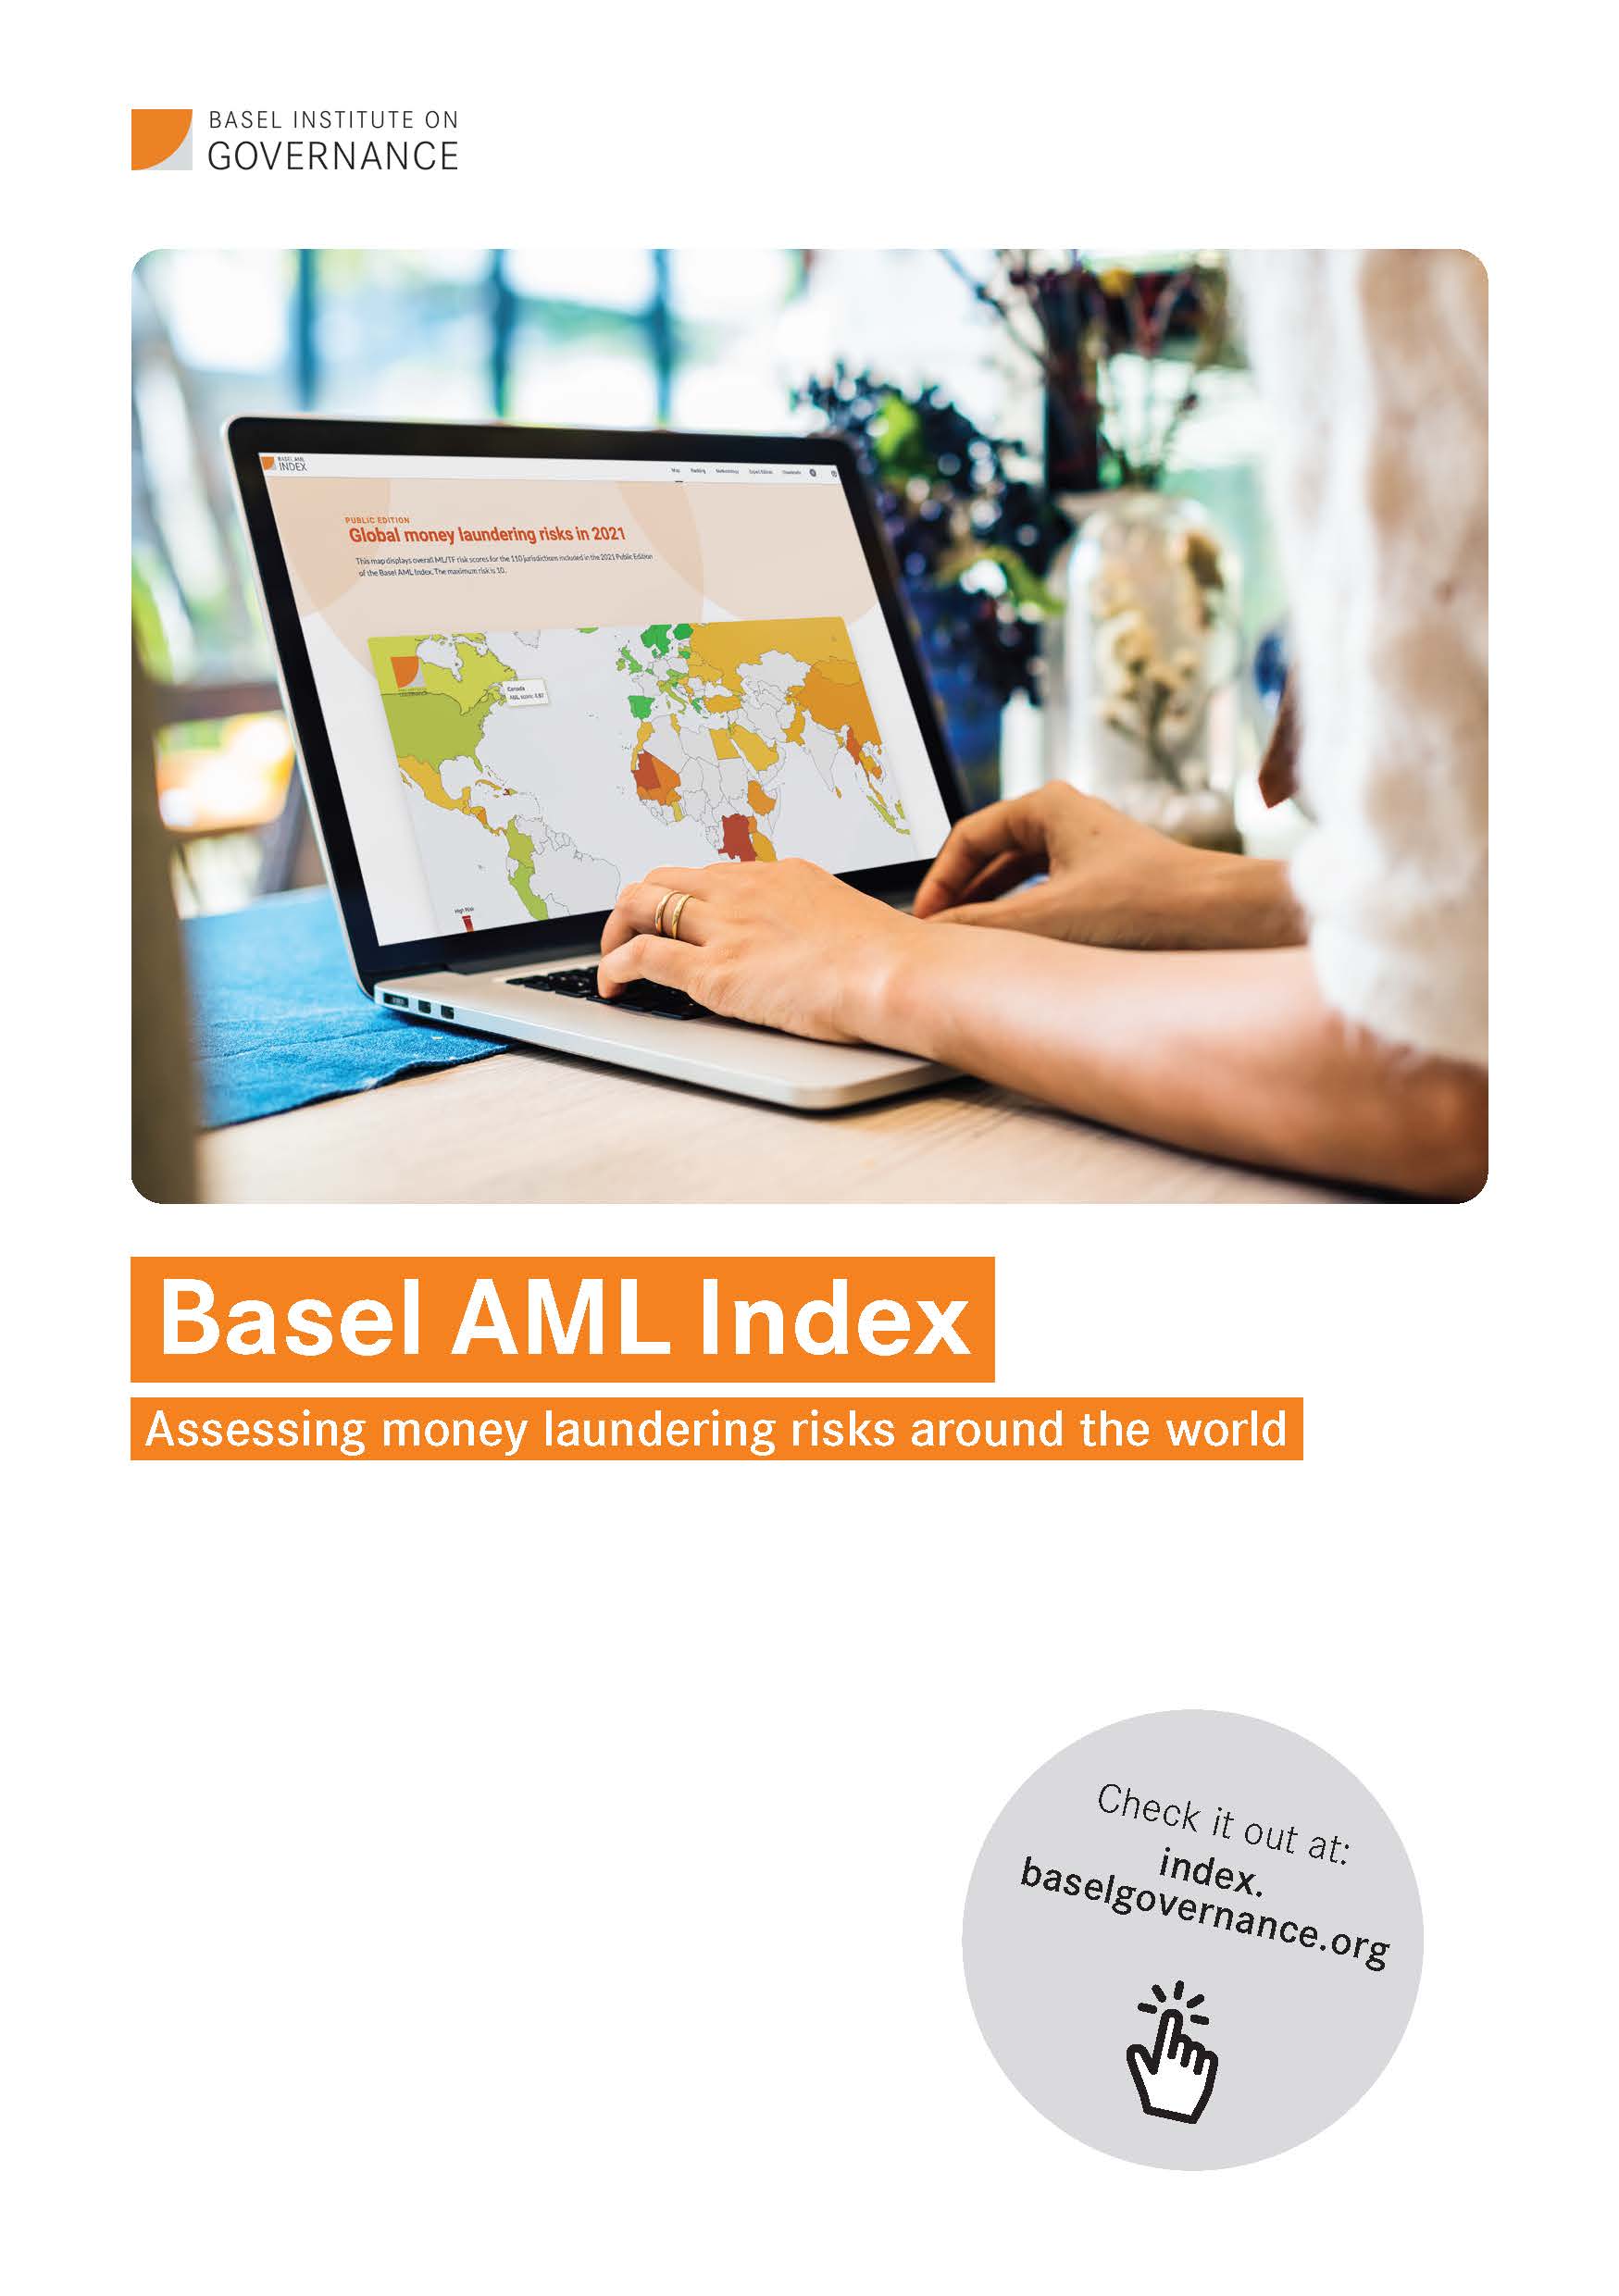 Cover page of Basel AML Index flyer